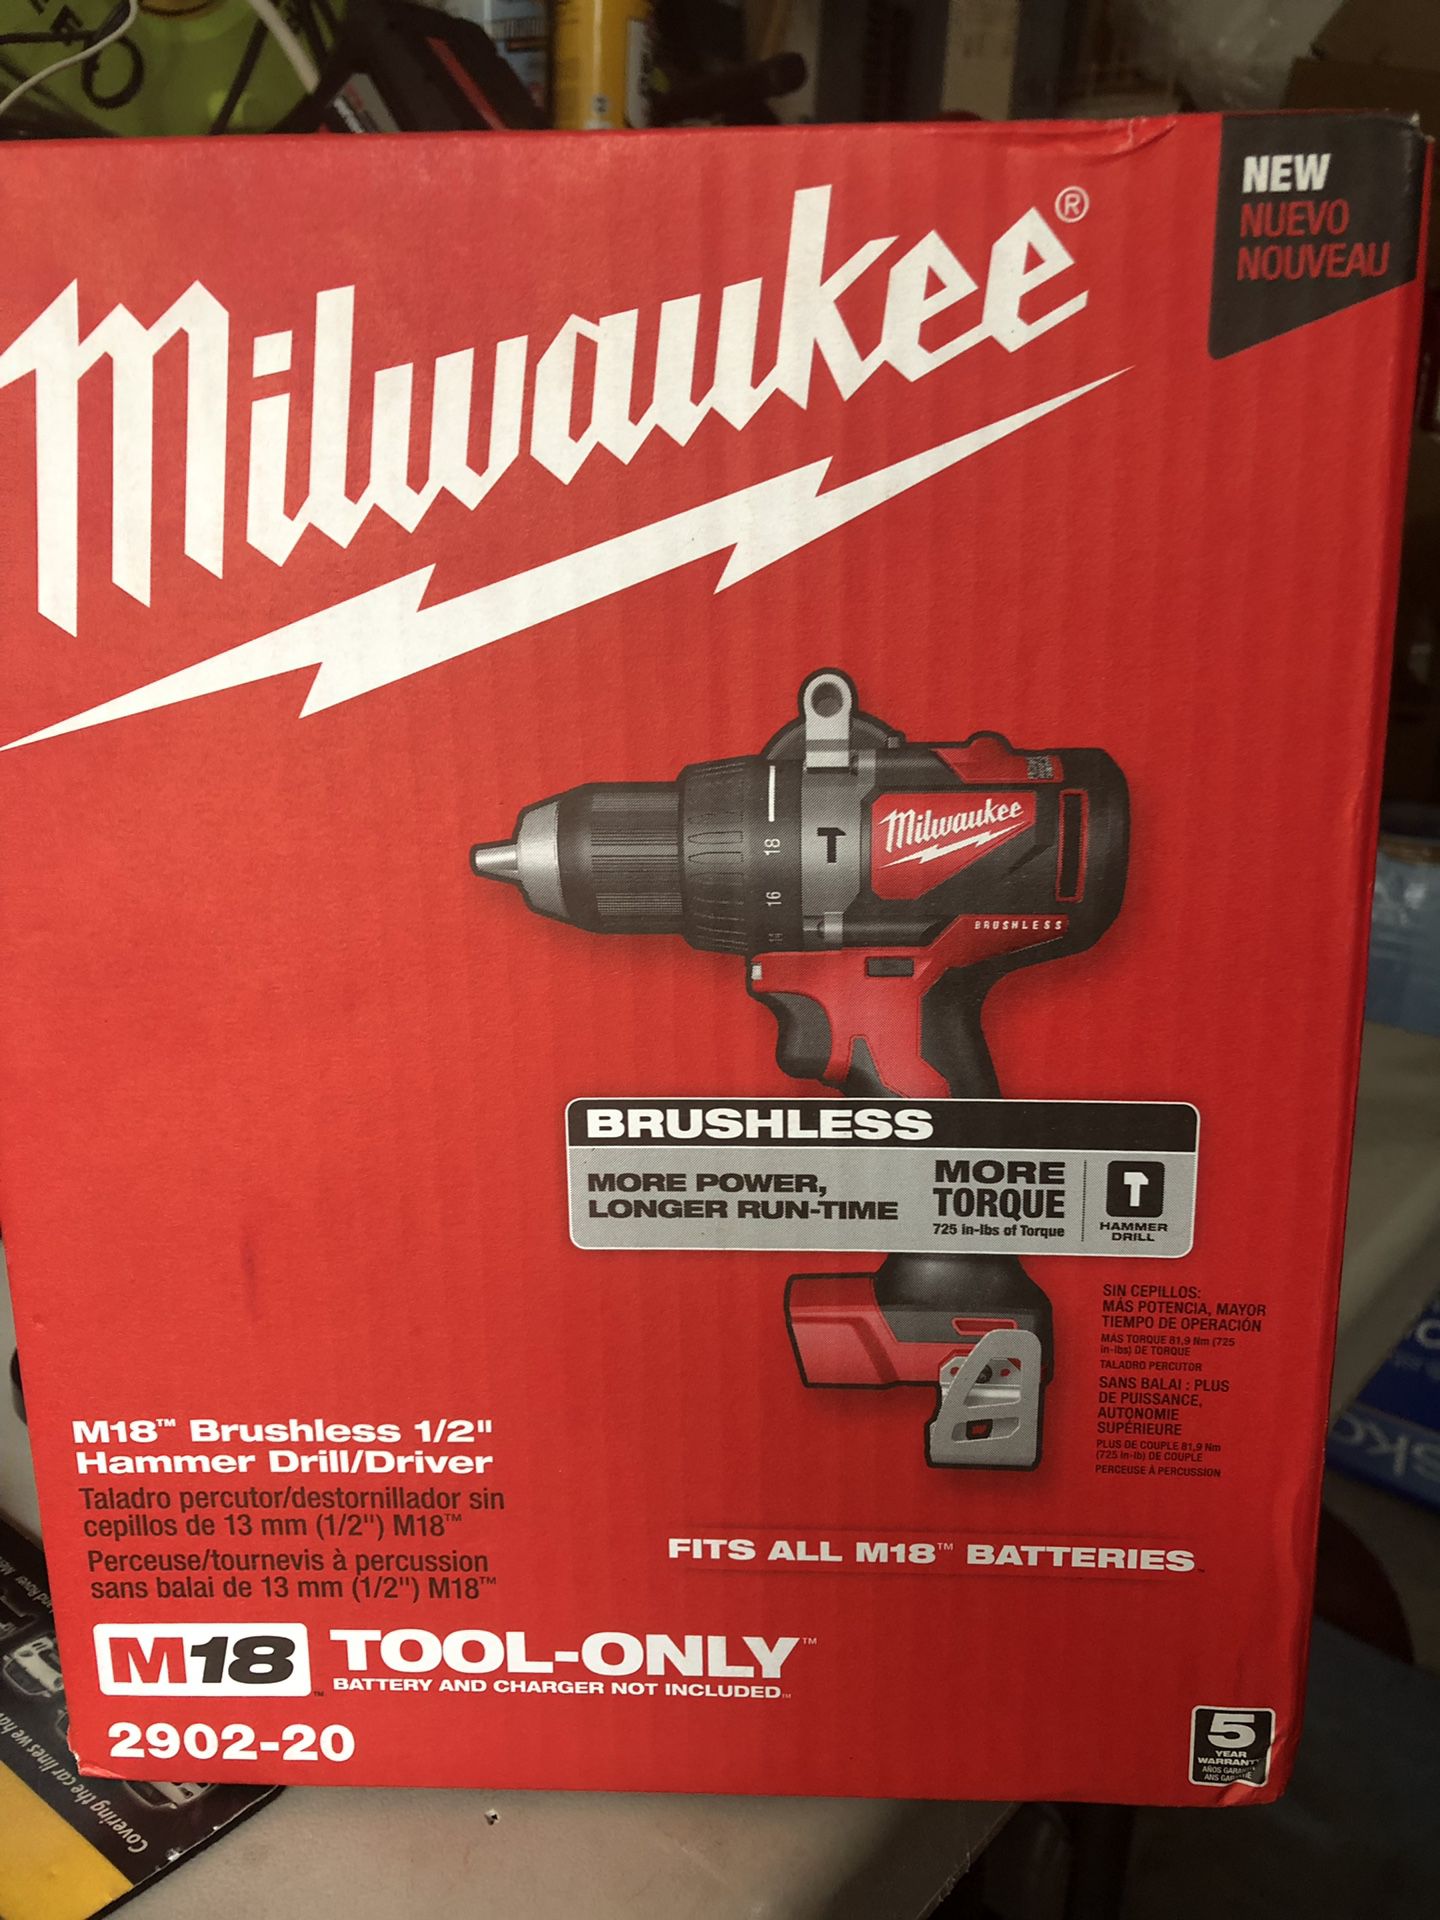 MILWAUKEE M18 2902-20 Cordless Brushless Hammer Drill/driver with handle